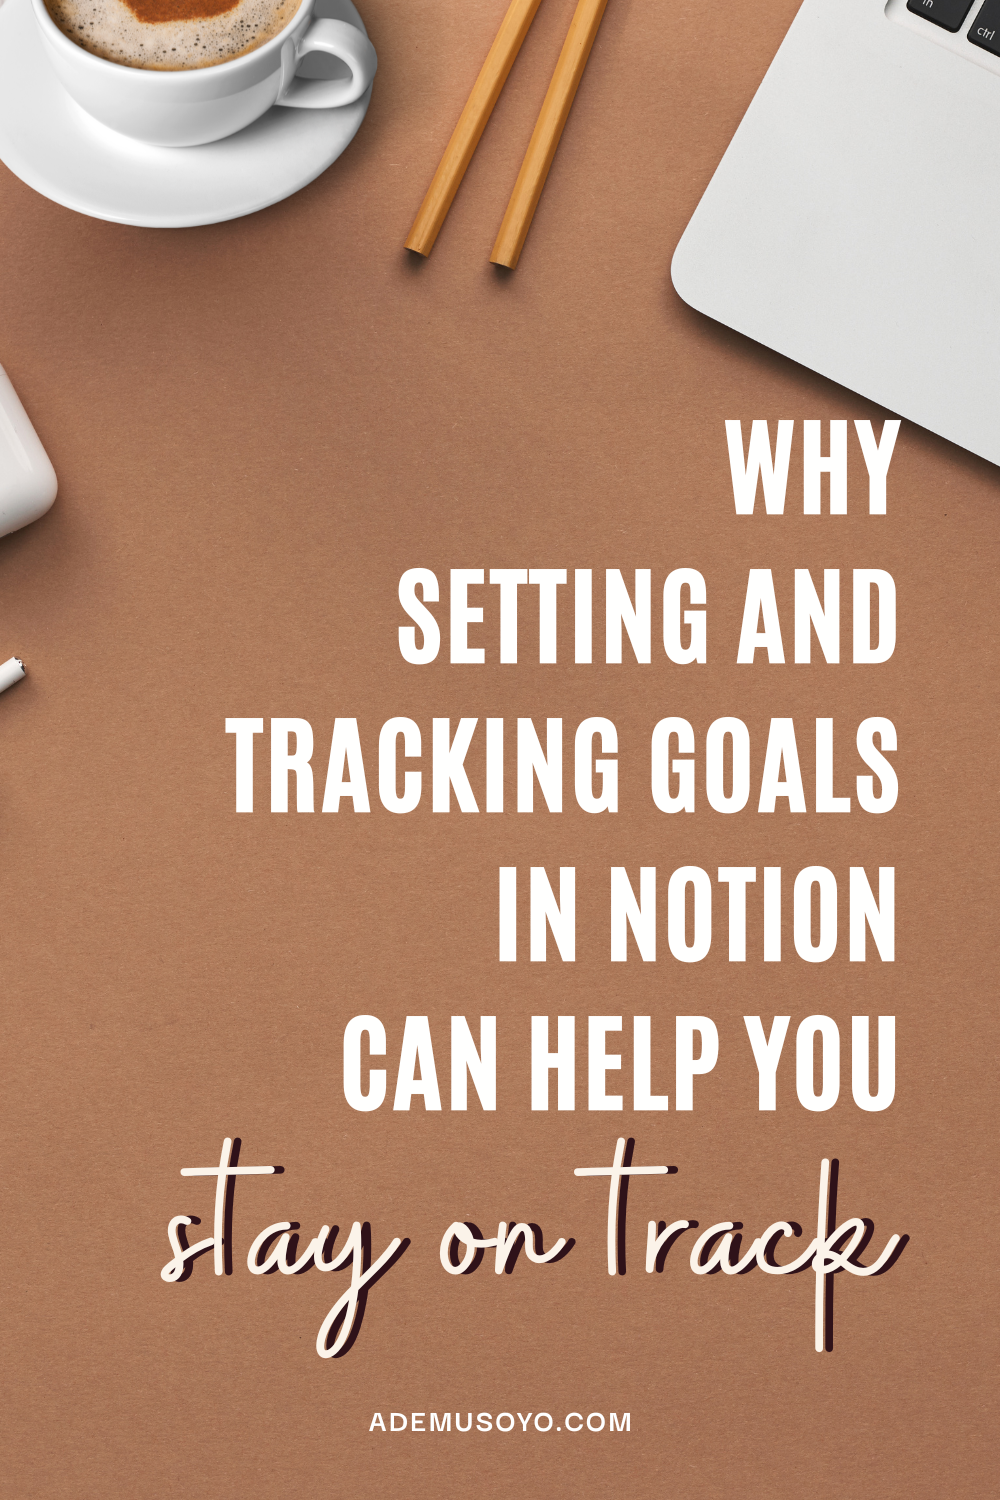 Setting and Tracking Goals Using a Notion Template, why goal setting is important, tracking goals, notion templates, aesthetic notion templates, notion app, notion api, free notion templates, goal tracker, habit tracker, notion goal template, time tracking, notion tracker, notion goal setting template, notion templates to do list, how to use notion template